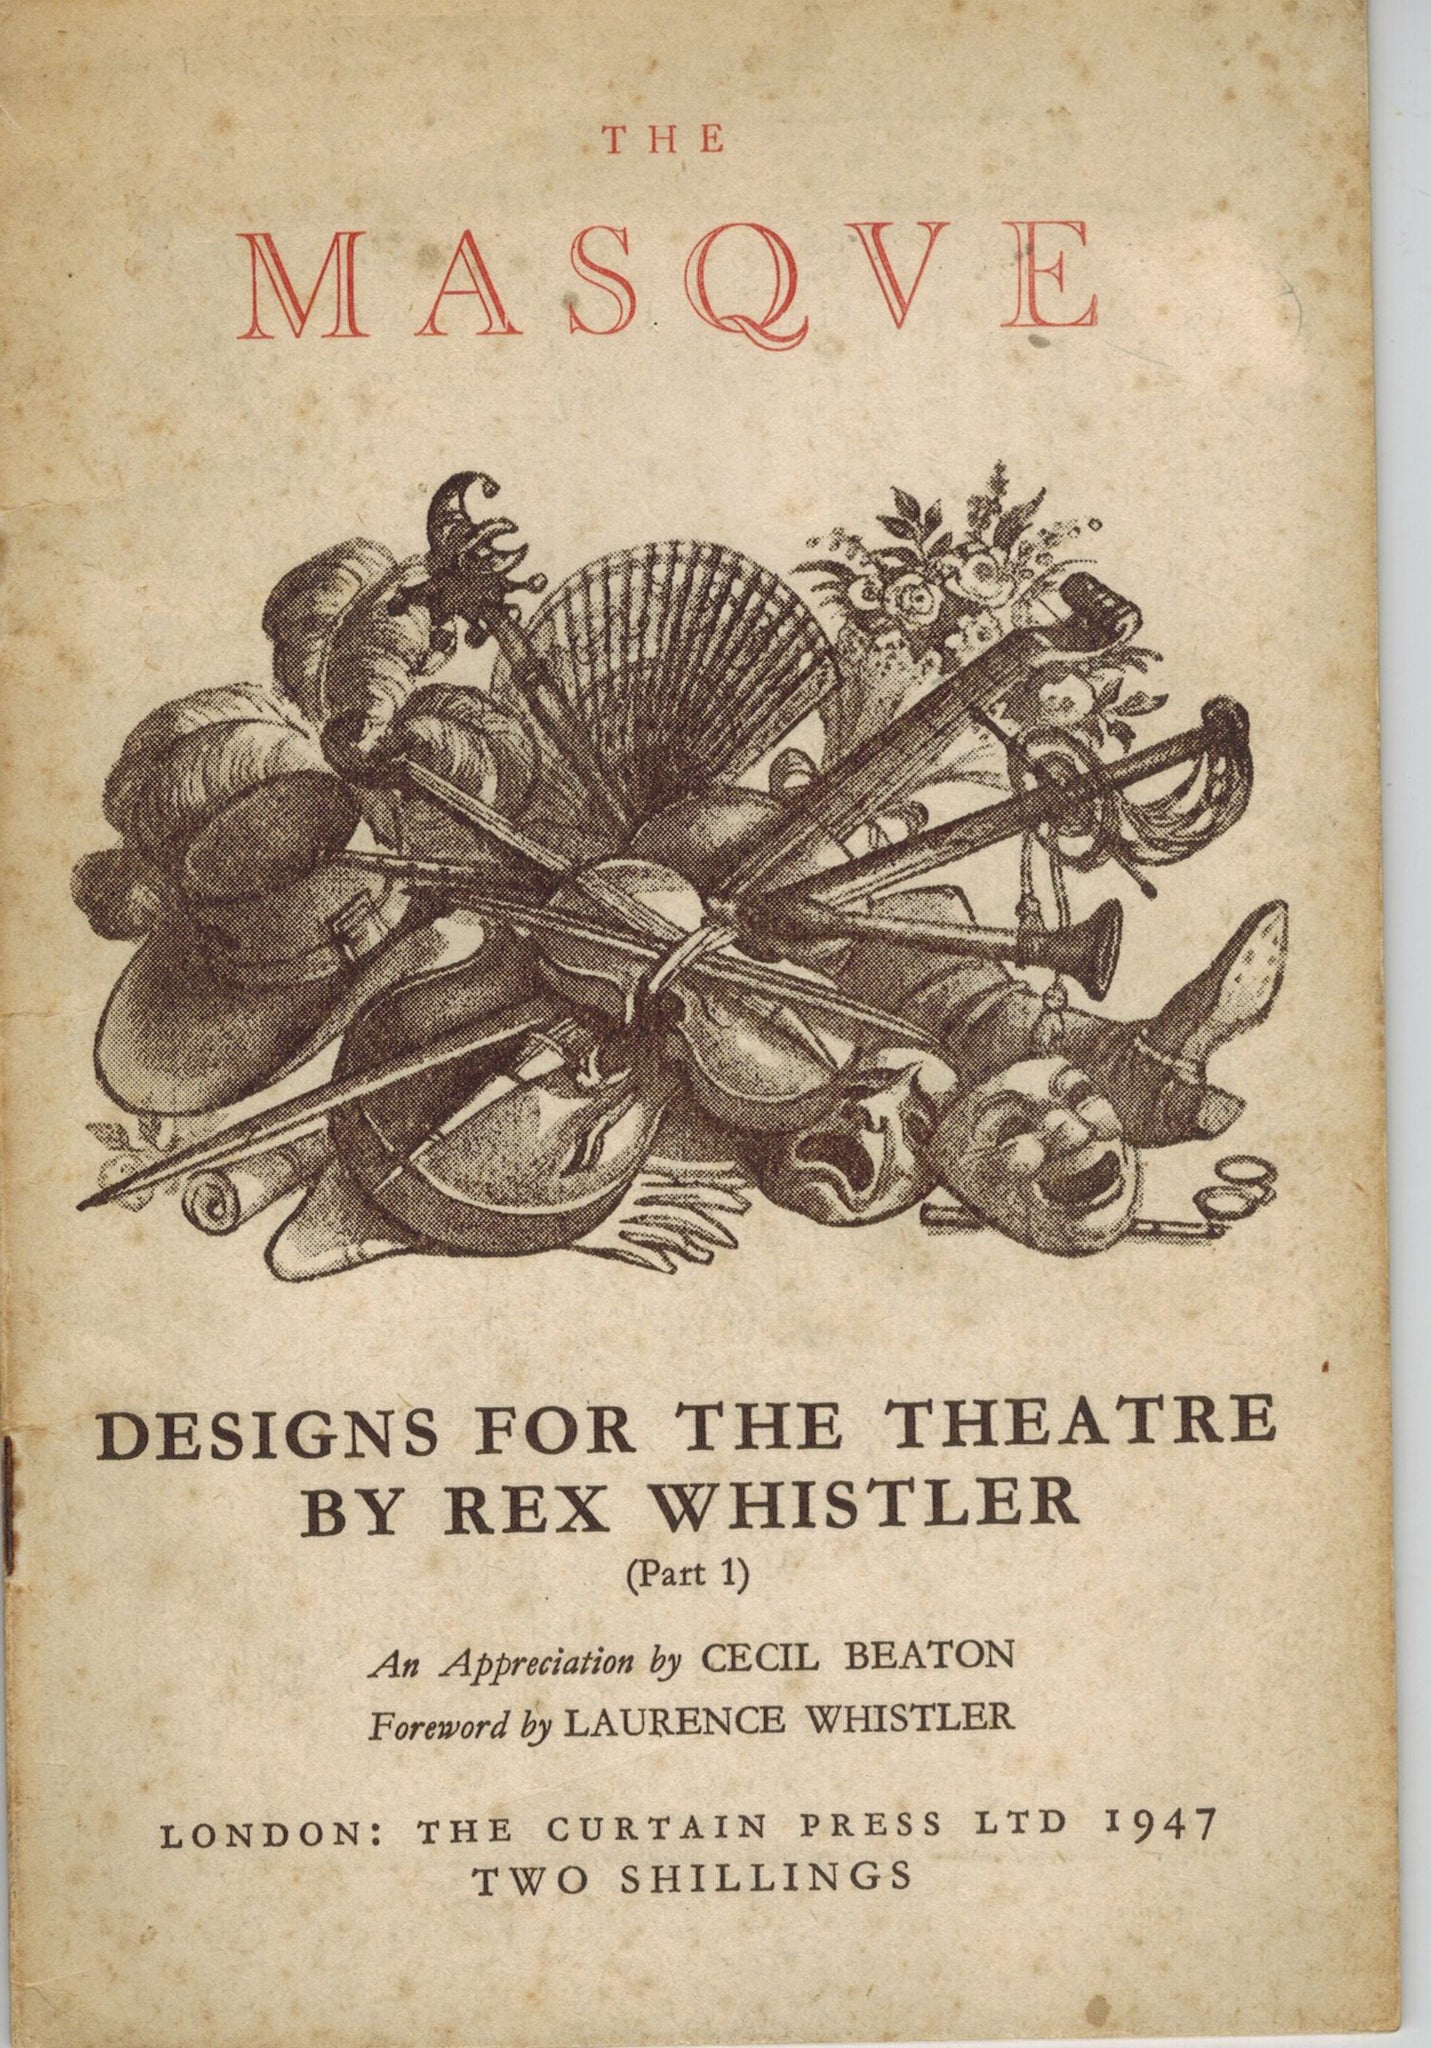 THE MASQUE DESIGNS FOR THE THEATRE NUMBER 2 PART ONE